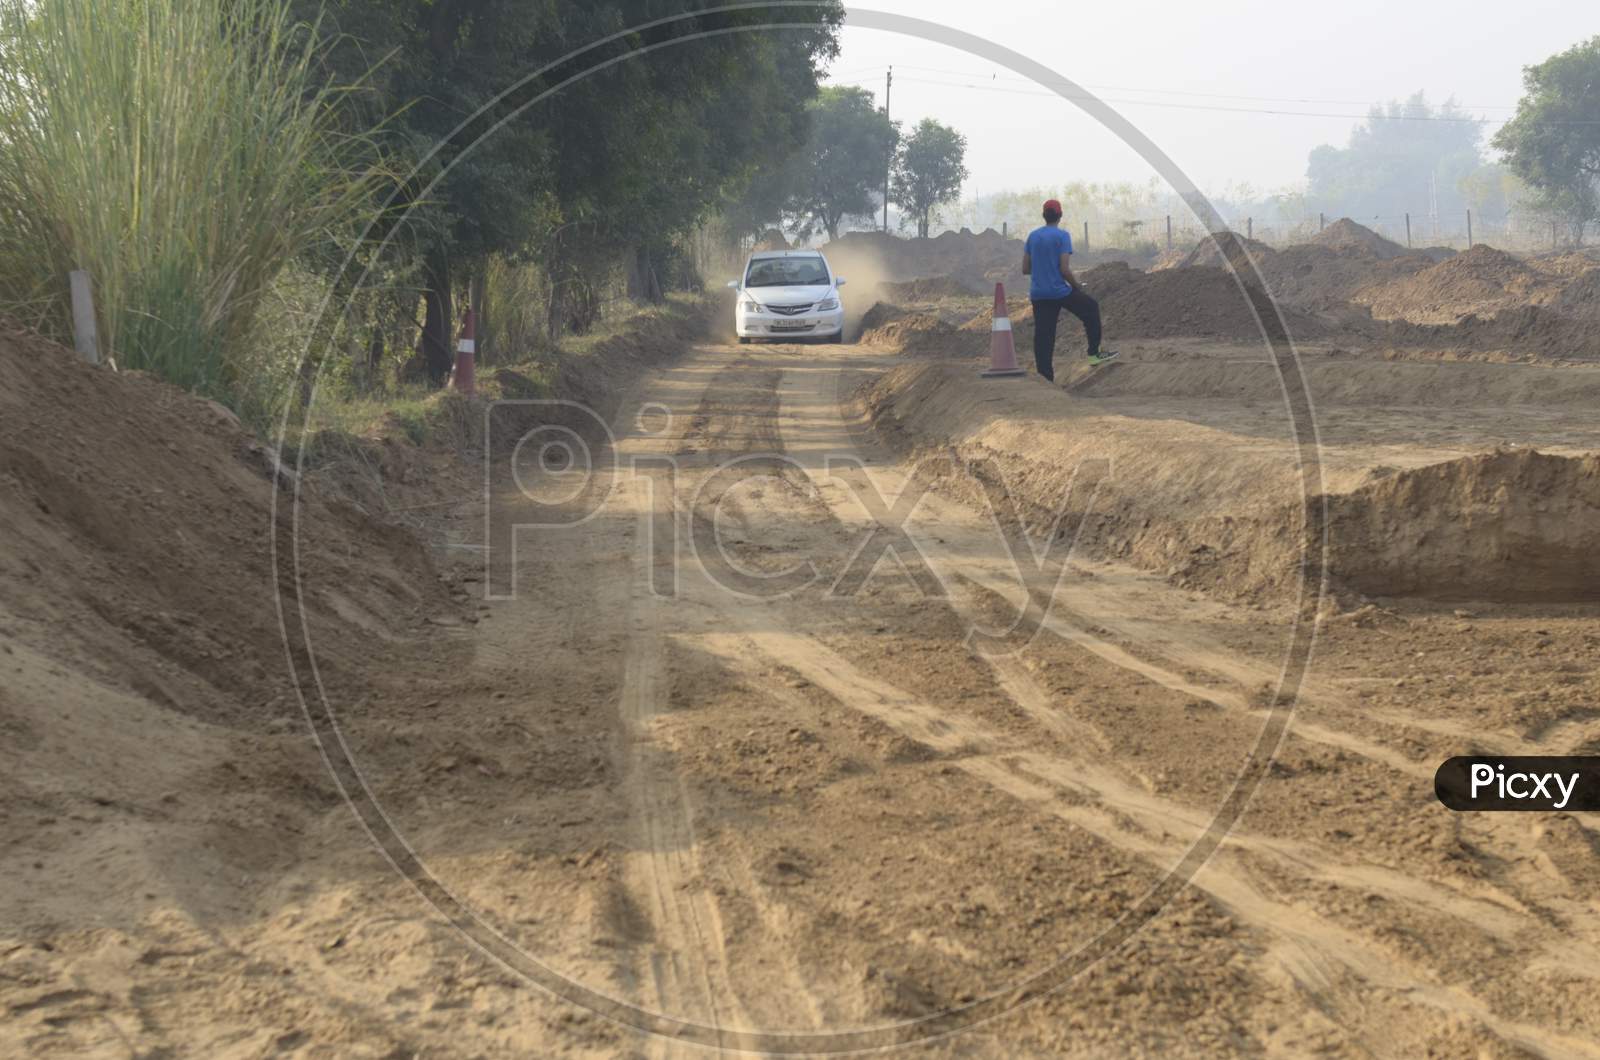 Landscape of a car moving past the man through the dirt road